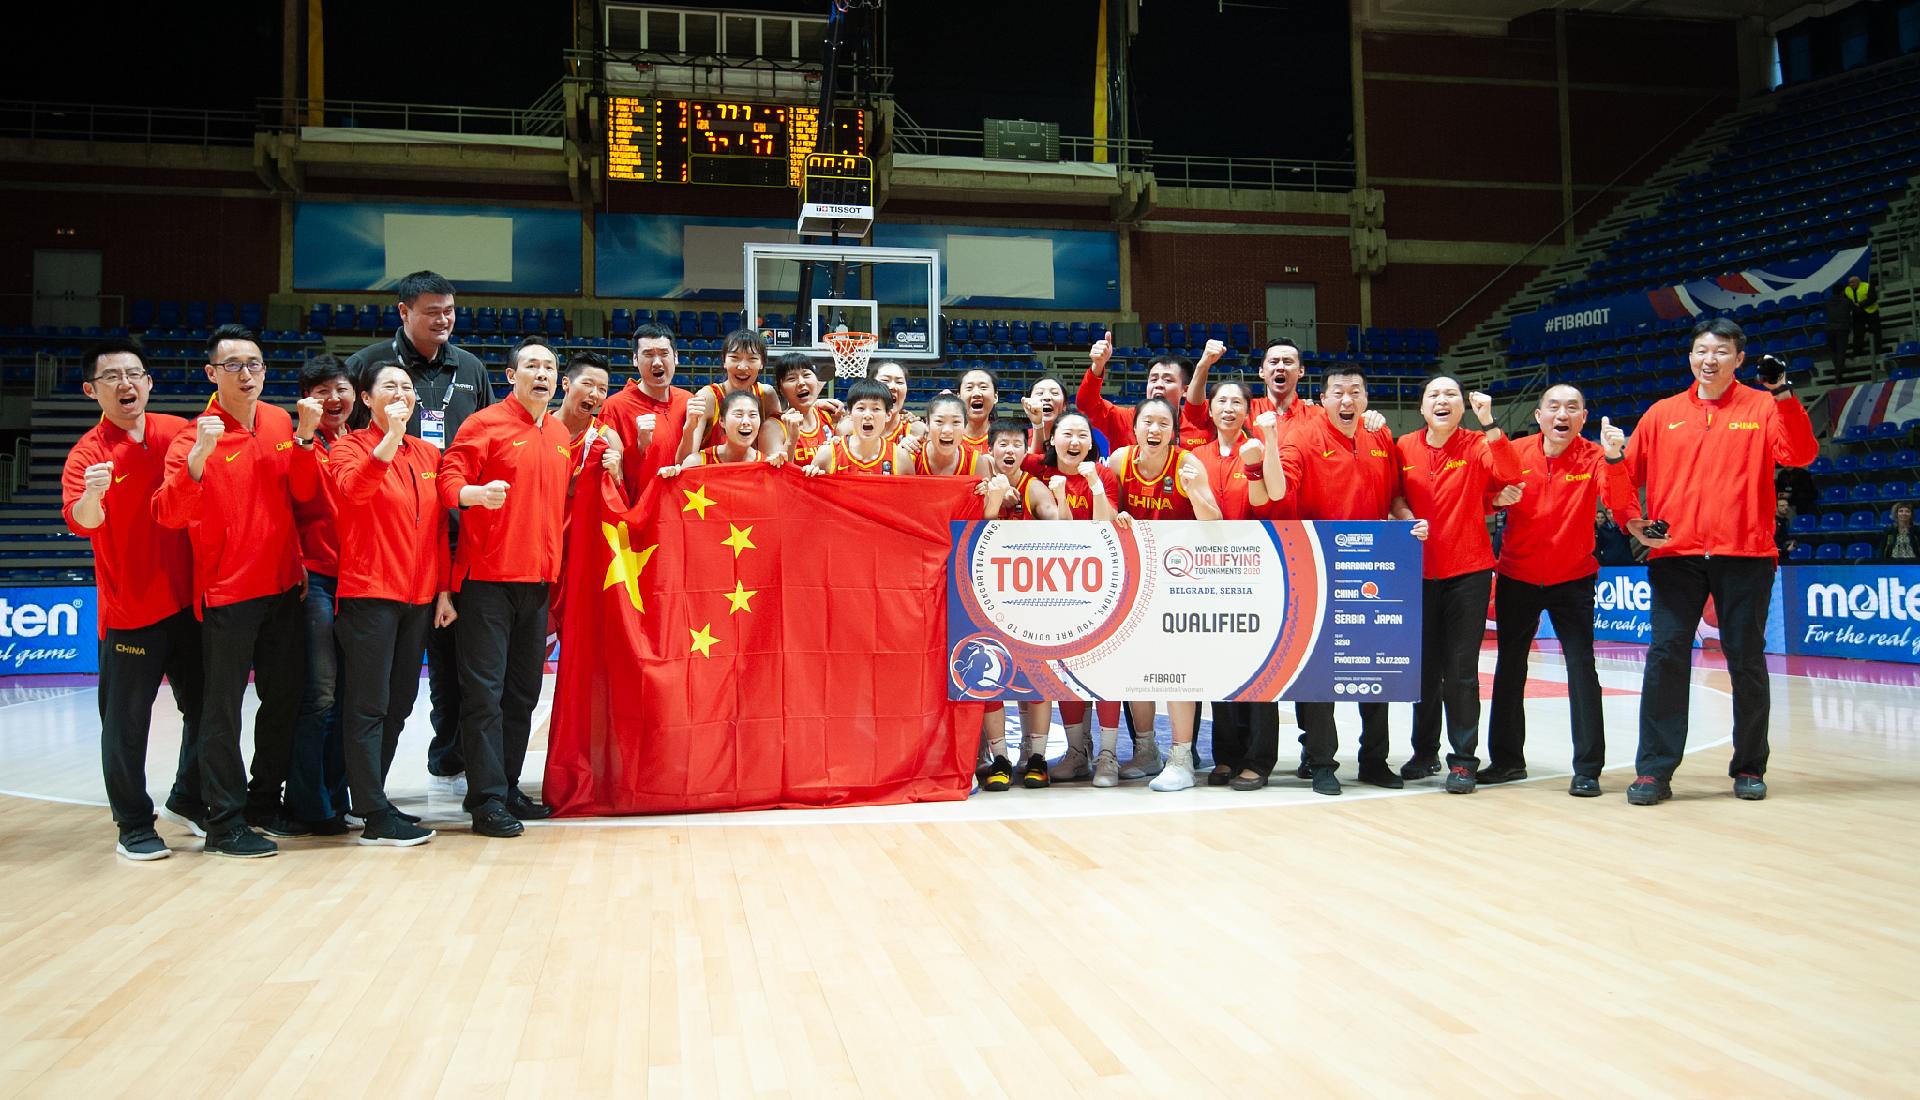 basketball at the 2020 summer olympics – women's 3x3 tournament